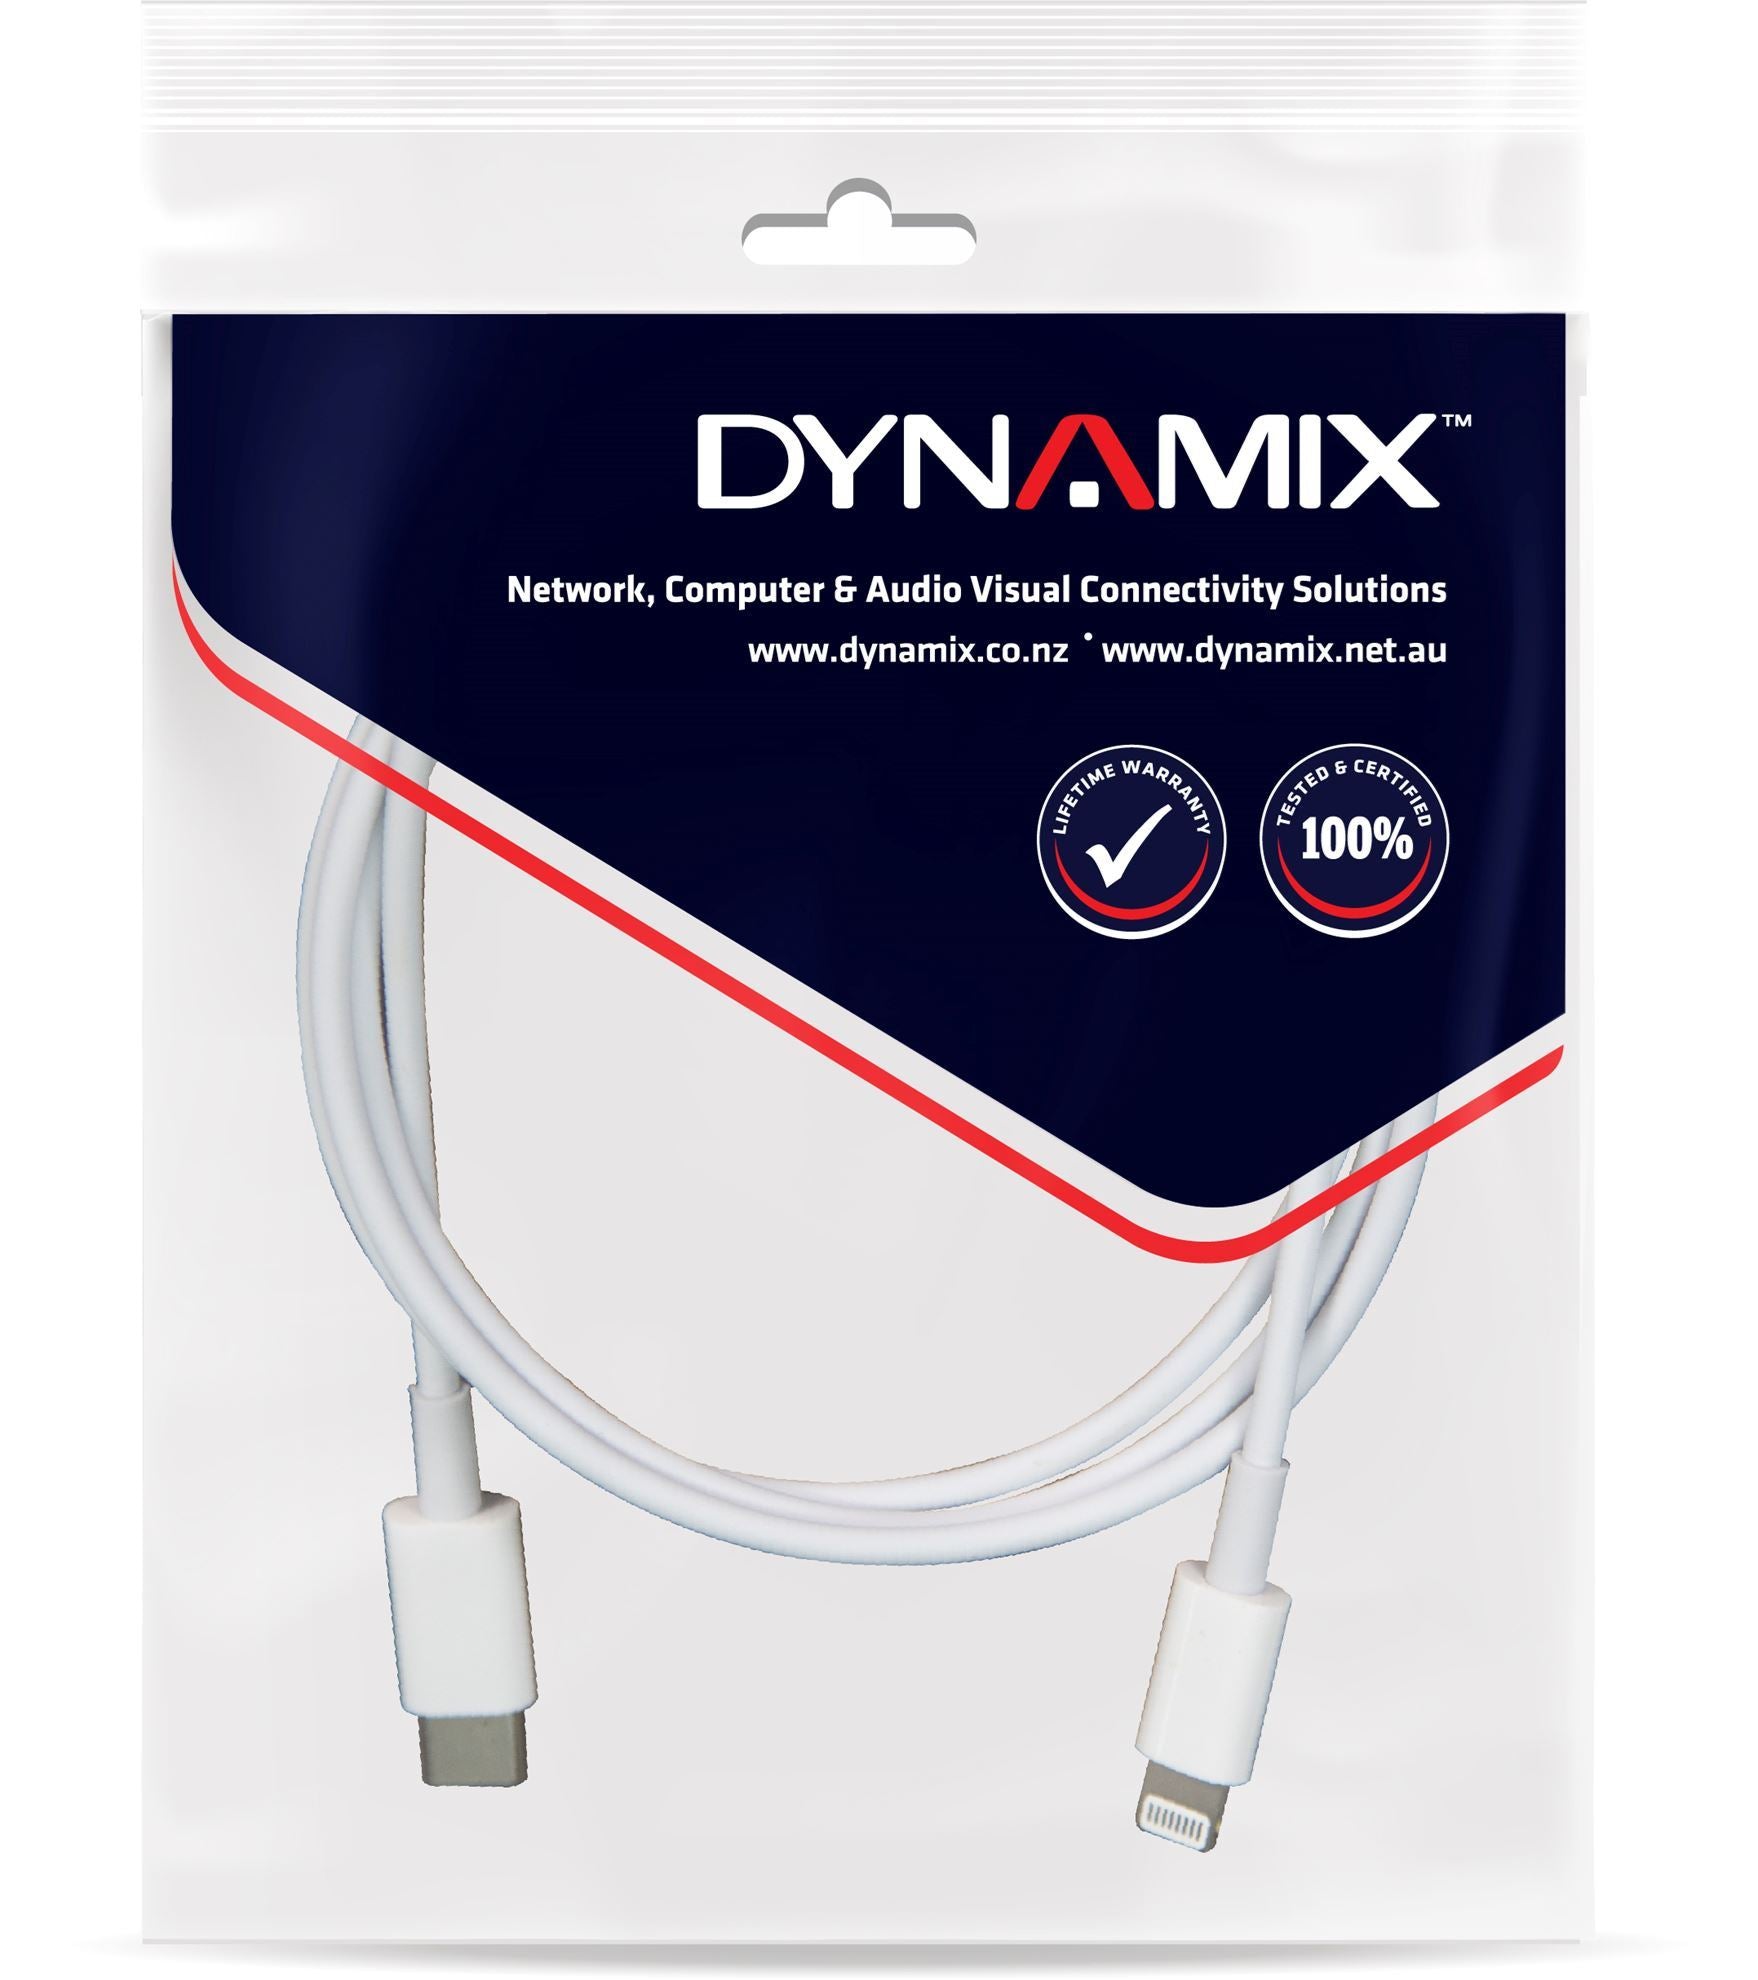 DYNAMIX_3m_USB-C_to_Lightning_Charge_&_Sync_Cable._For_Apple_iPhone,_iPad,_iPad_mini_&_iPods_*Not_MFI_Certified* 940